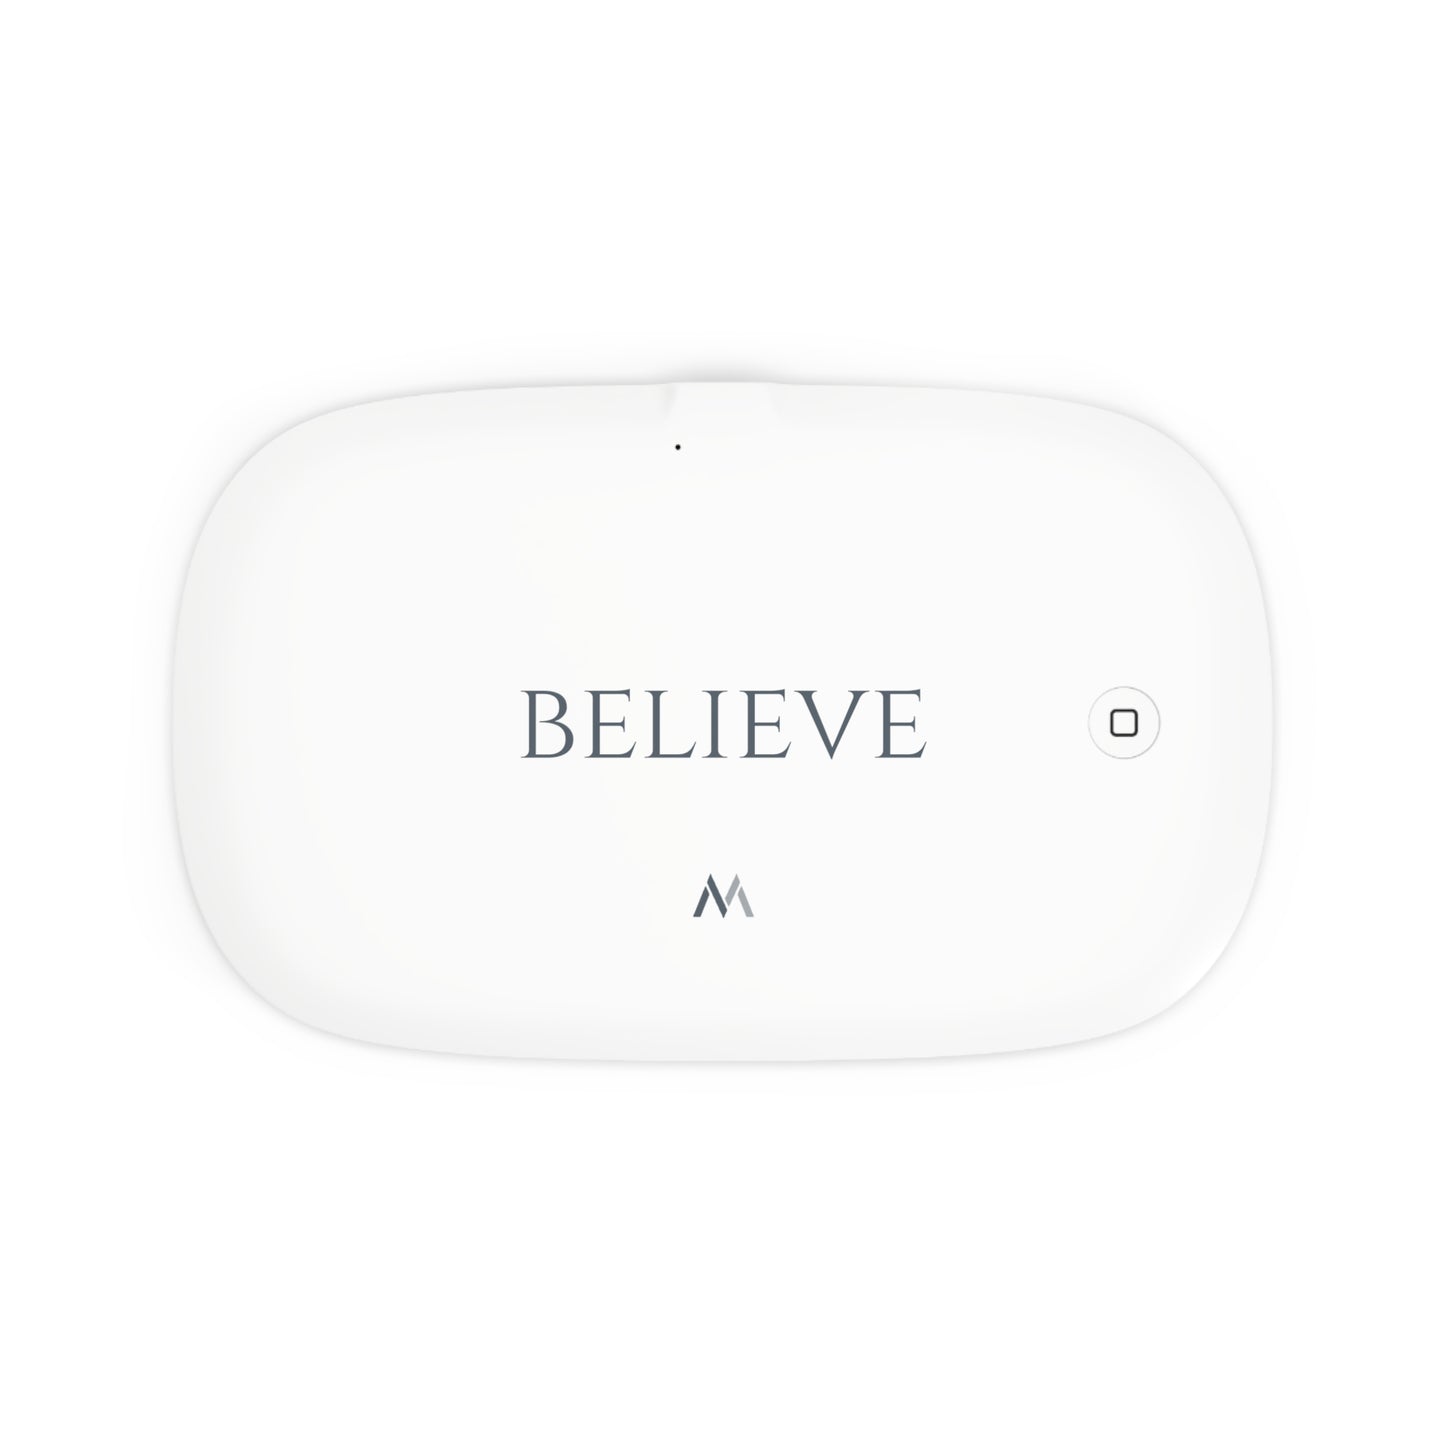 "BELIEVE" UV Phone Sanitizer and Wireless Charging Pad